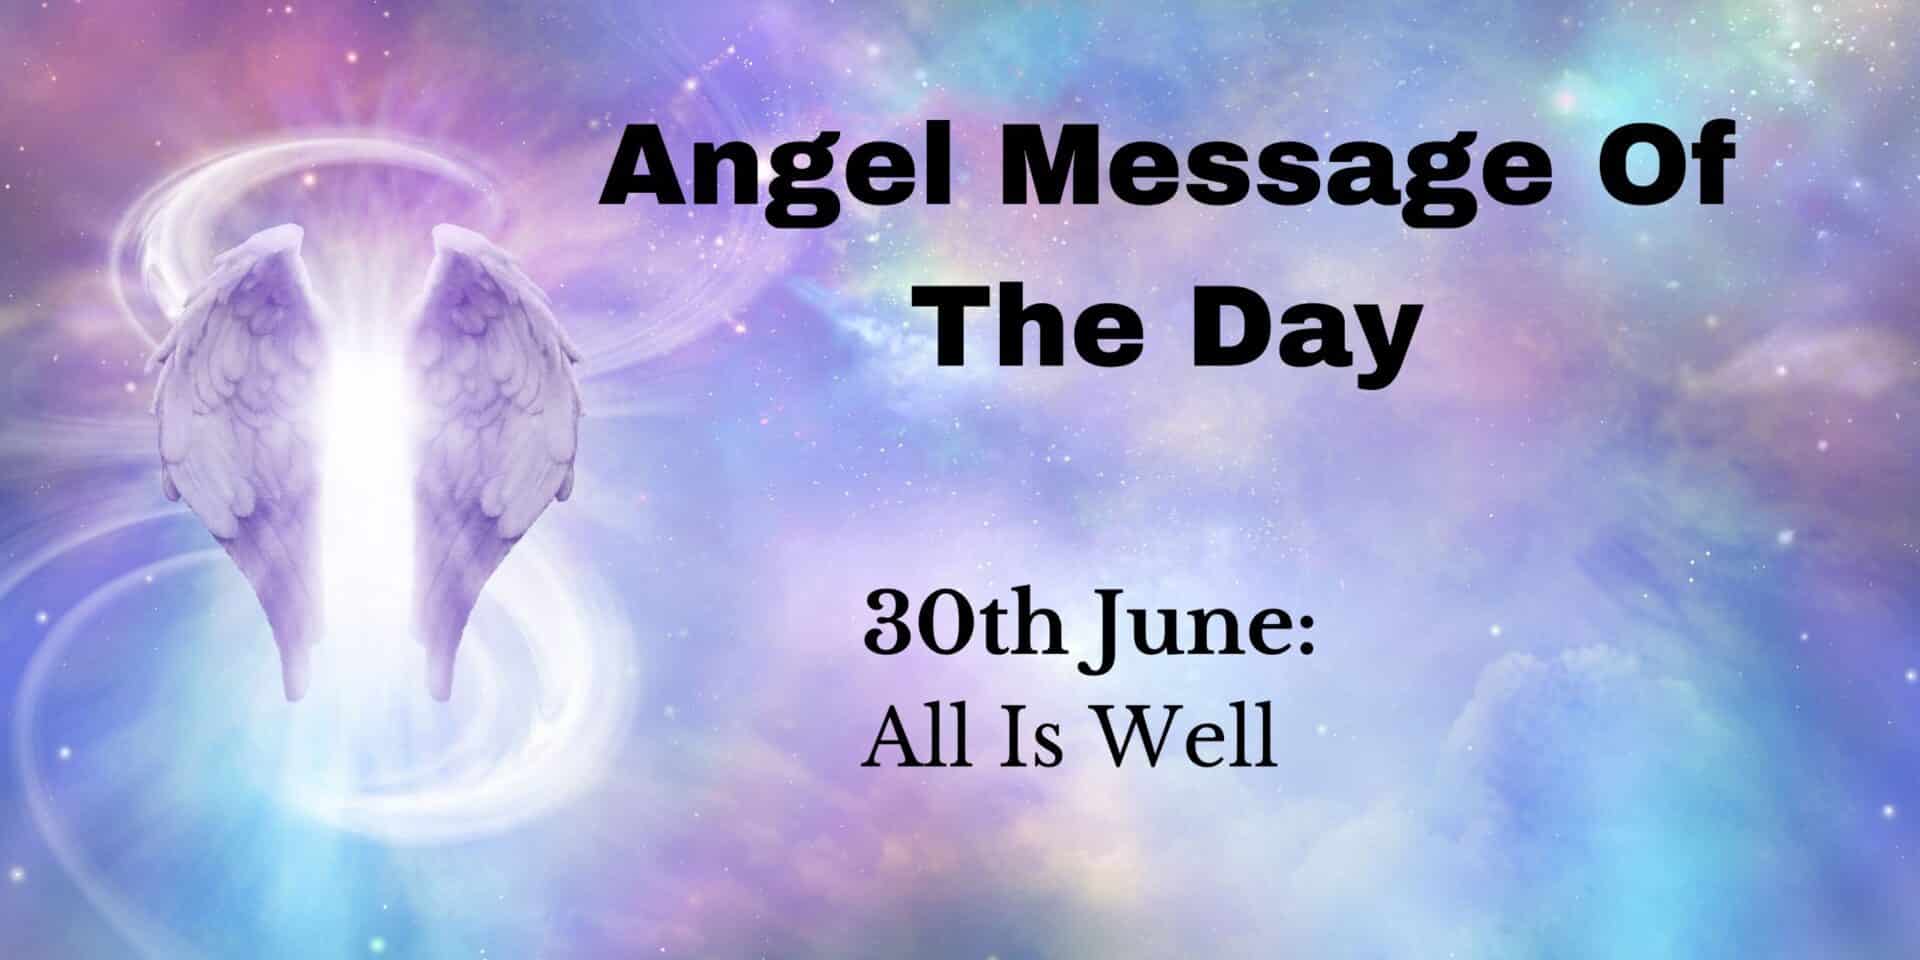 angel message of the day : all is well